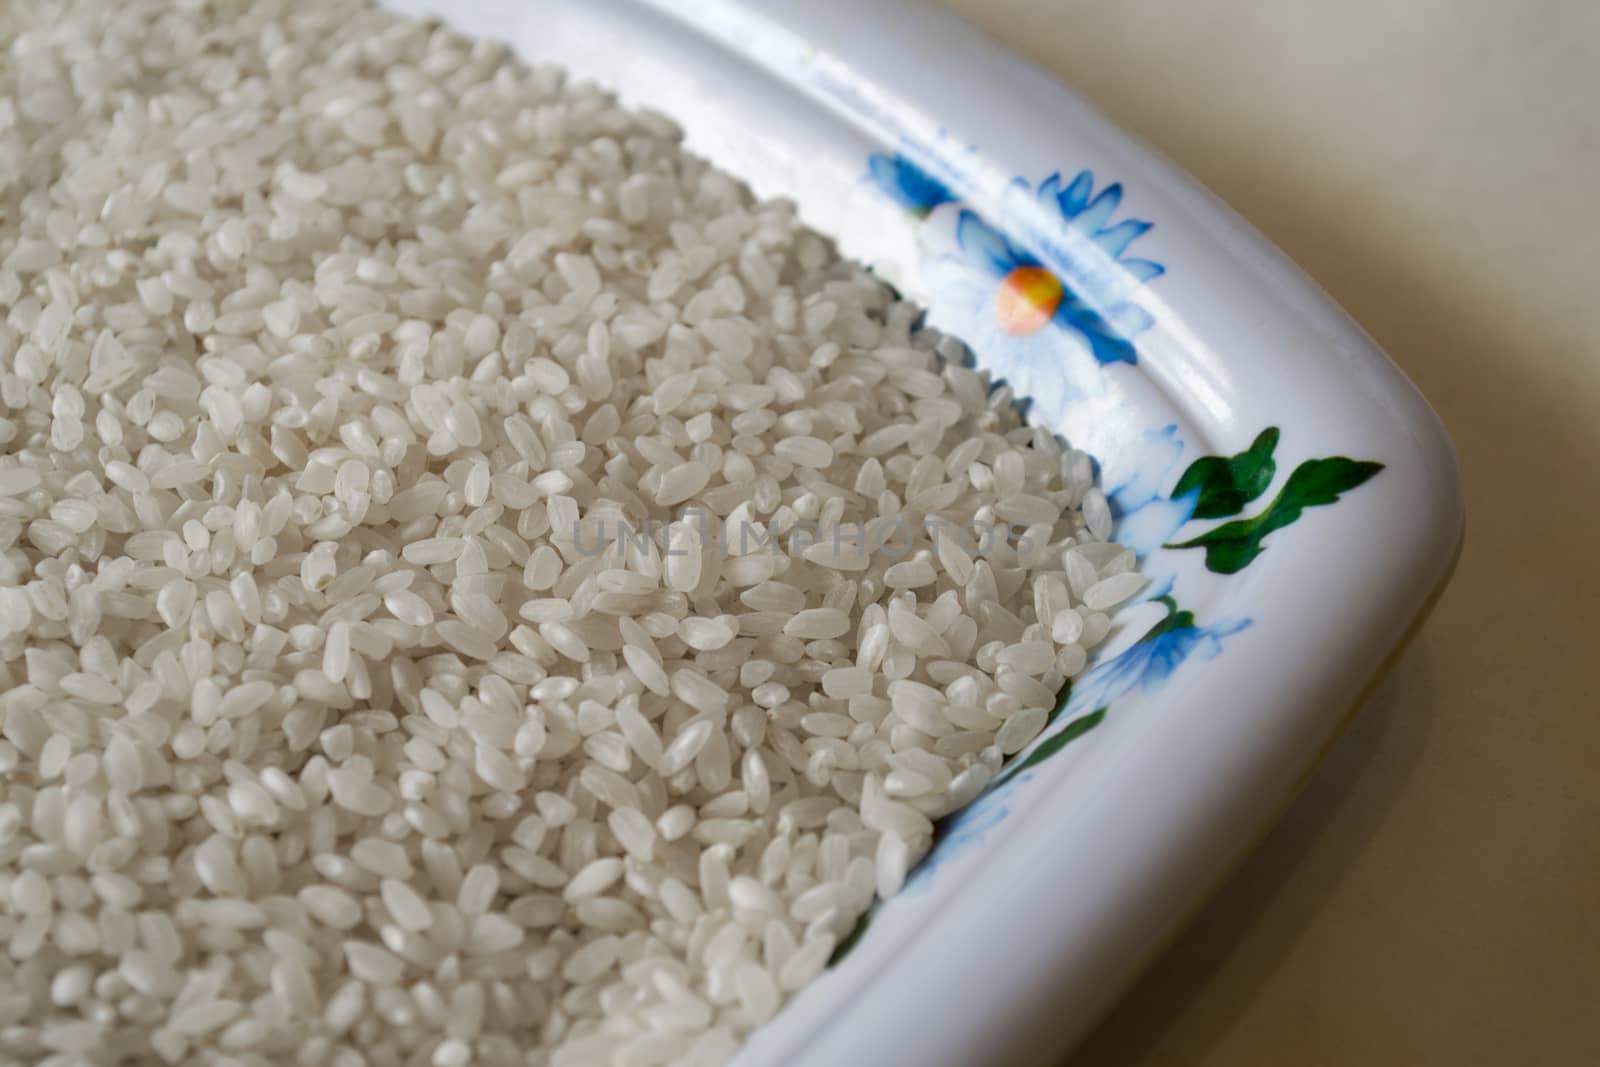 Photo of rice premium in a white plate